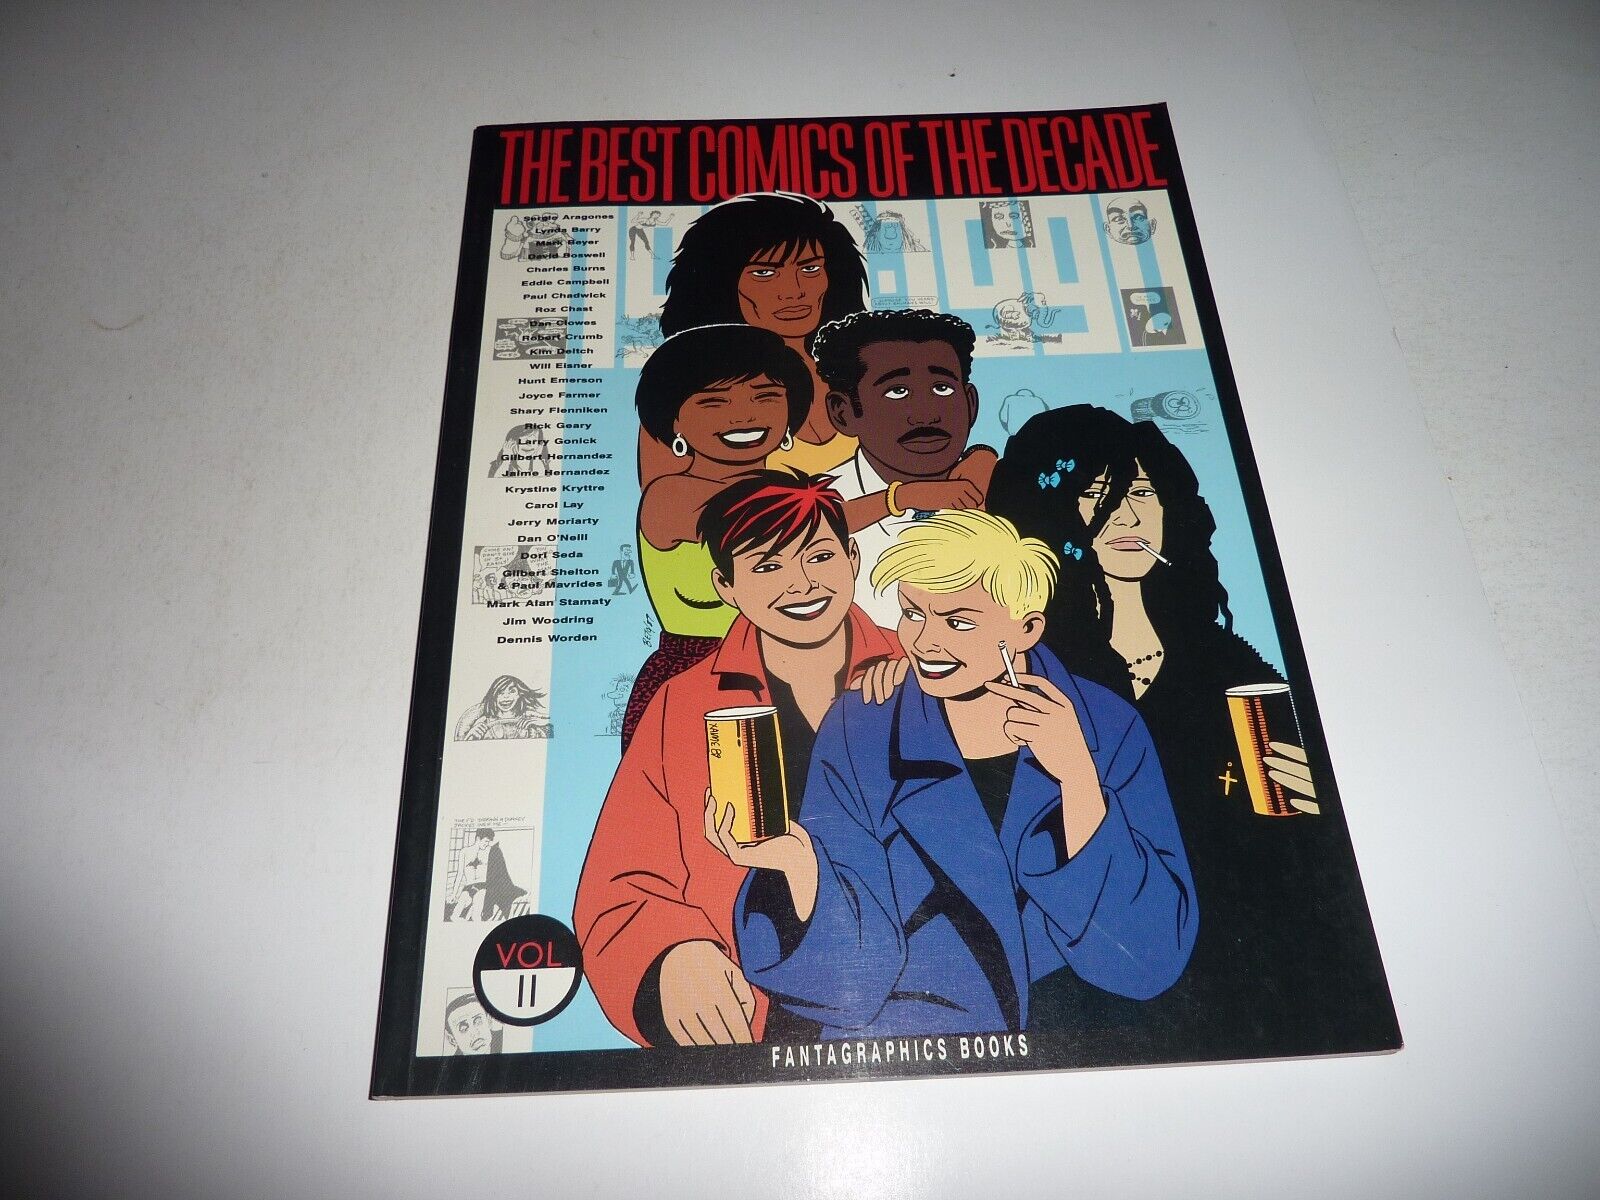 THE BEST COMICS OF THE DECADE #2 1980-1990 Fantagraphics Books 1990 VF/NM